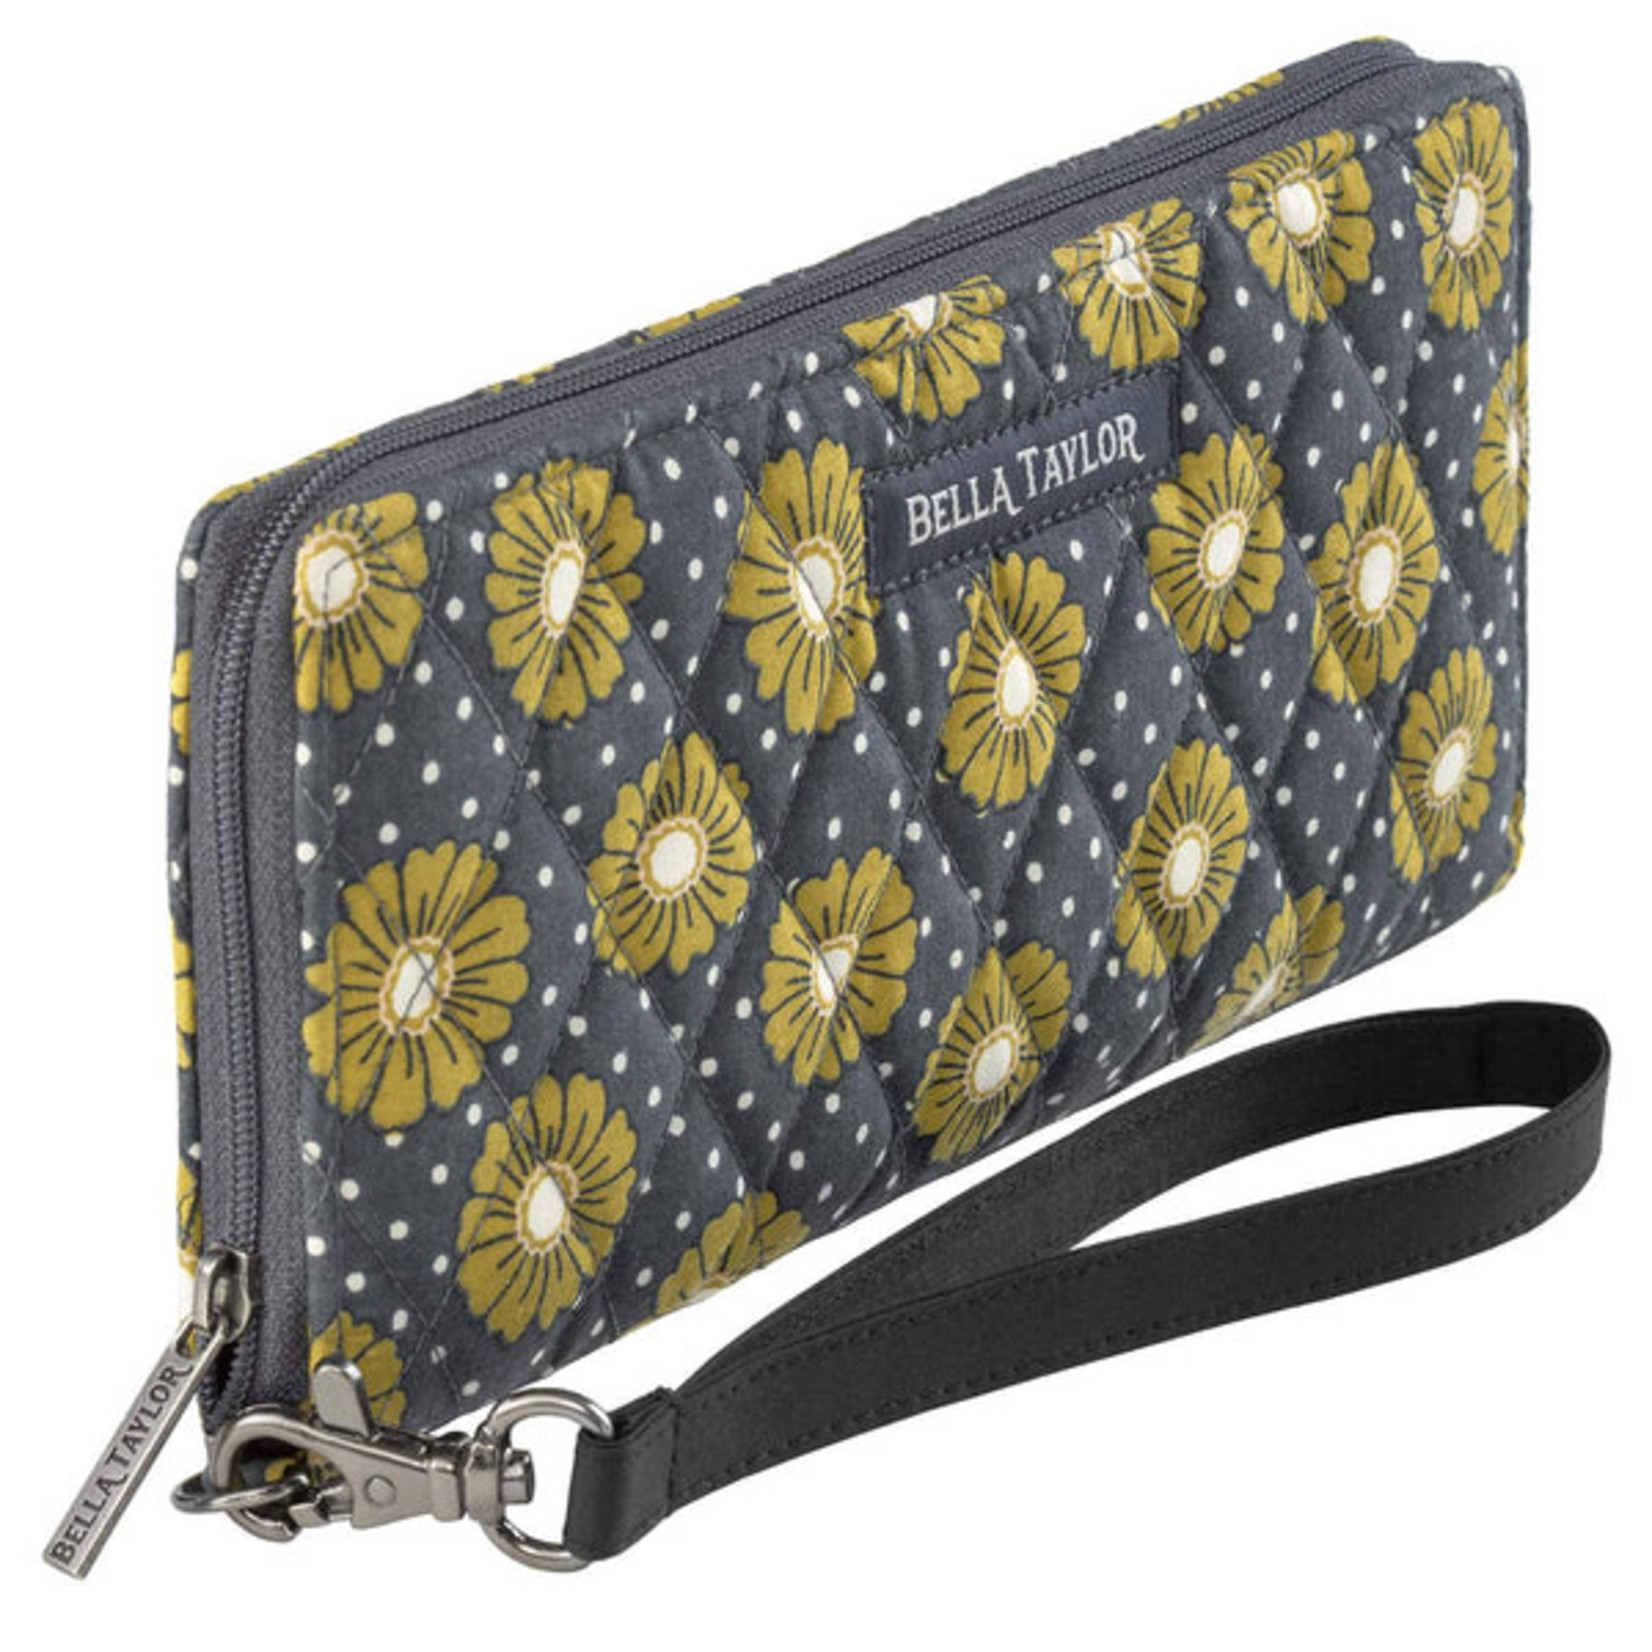 Bella Taylor Dotted Daisy Charcoal - RFID Envelope Wallet